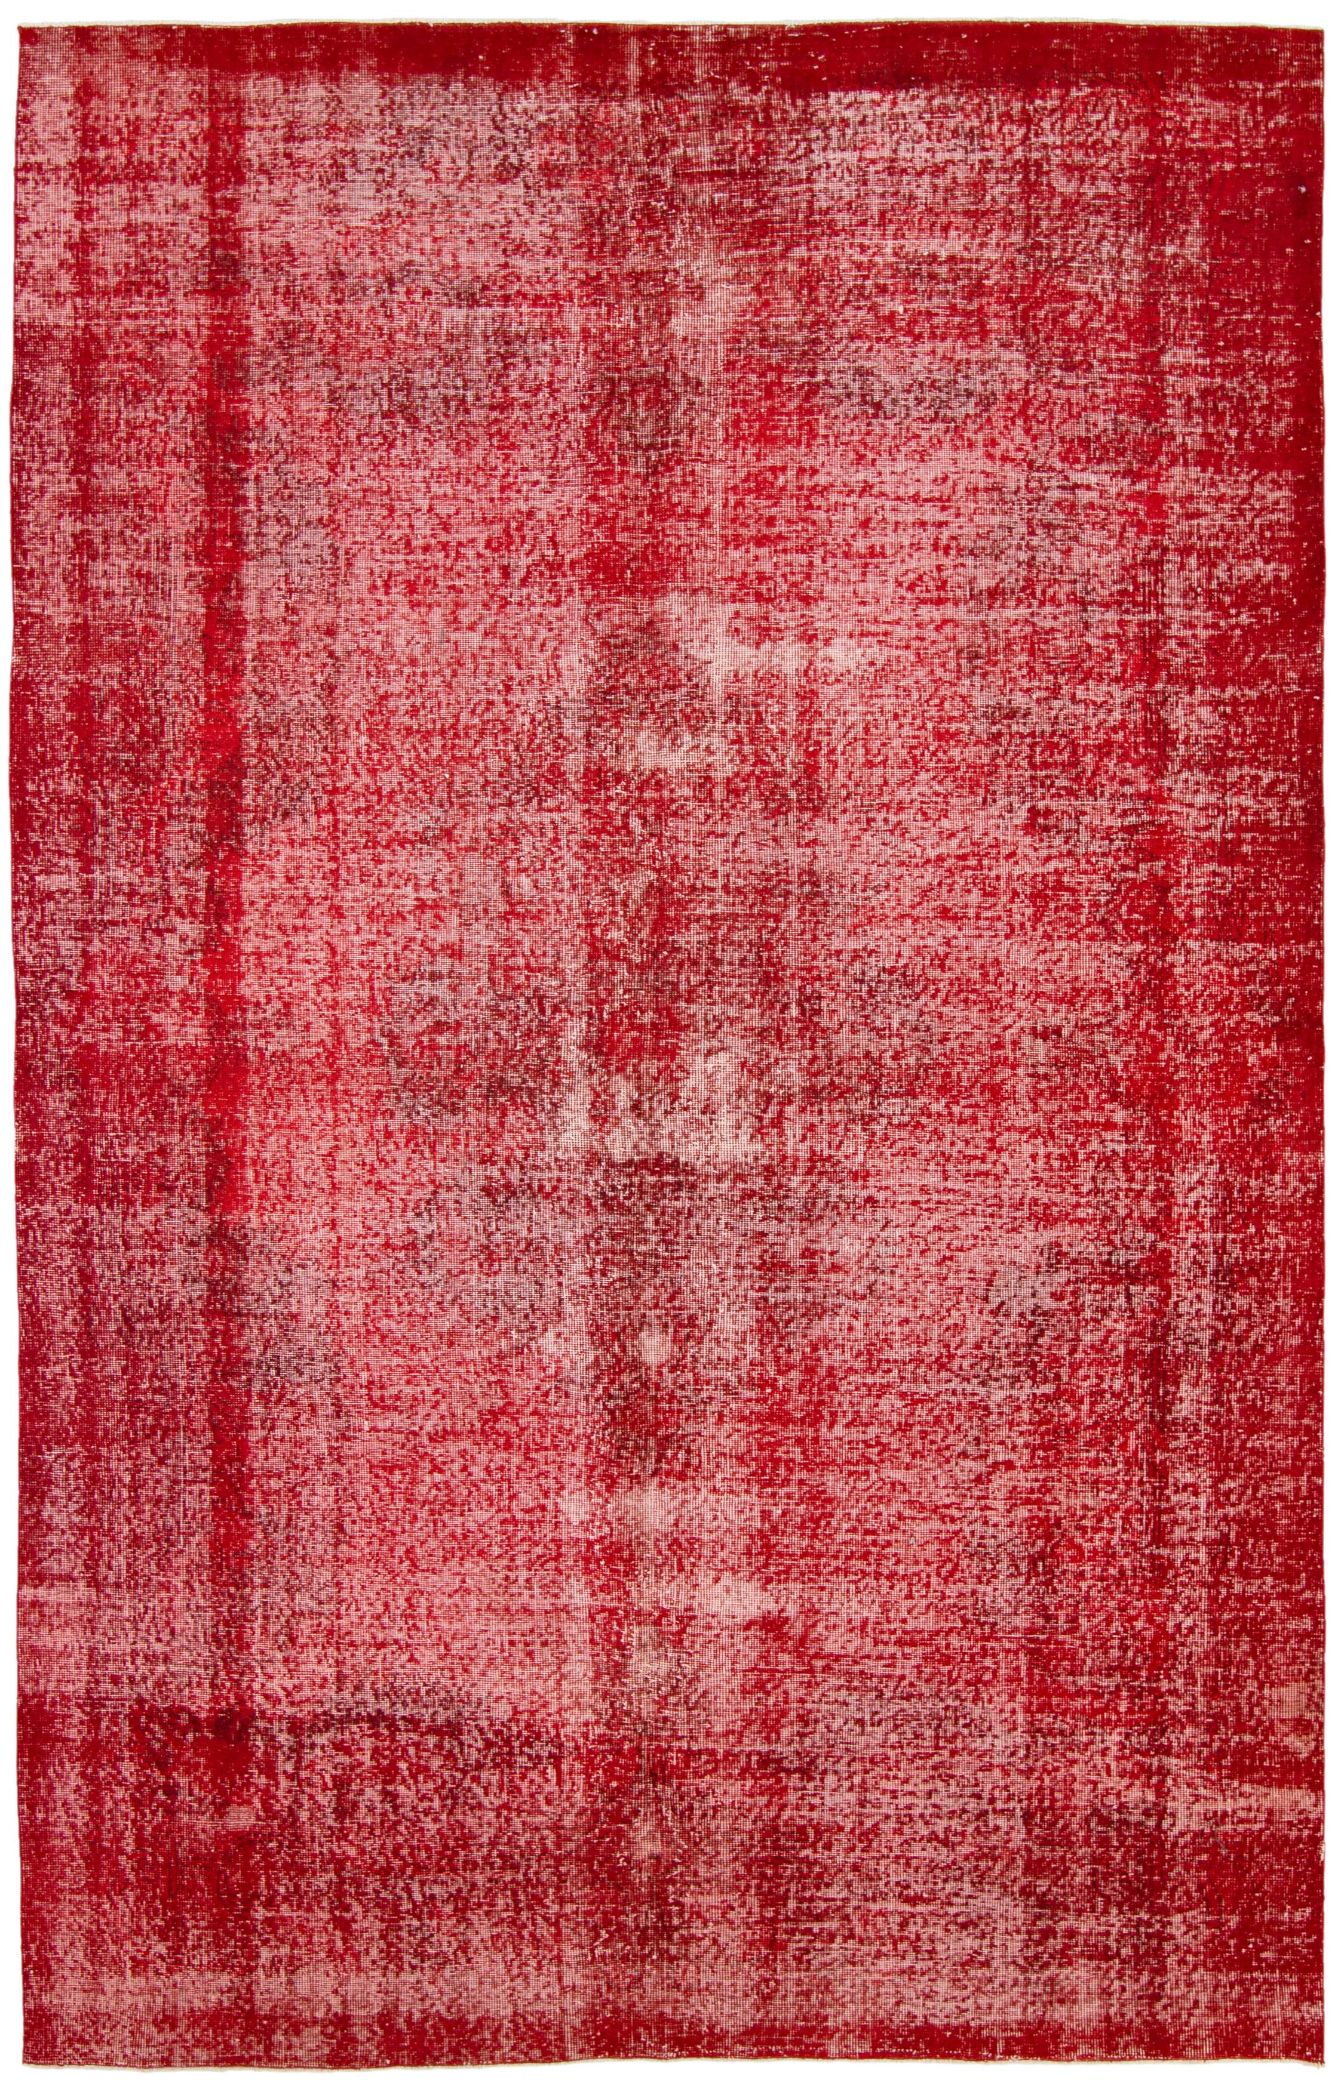 Hand-knotted Color Transition  Rug 10'3" x 6'7" Size: 6'7" x 10'3"  